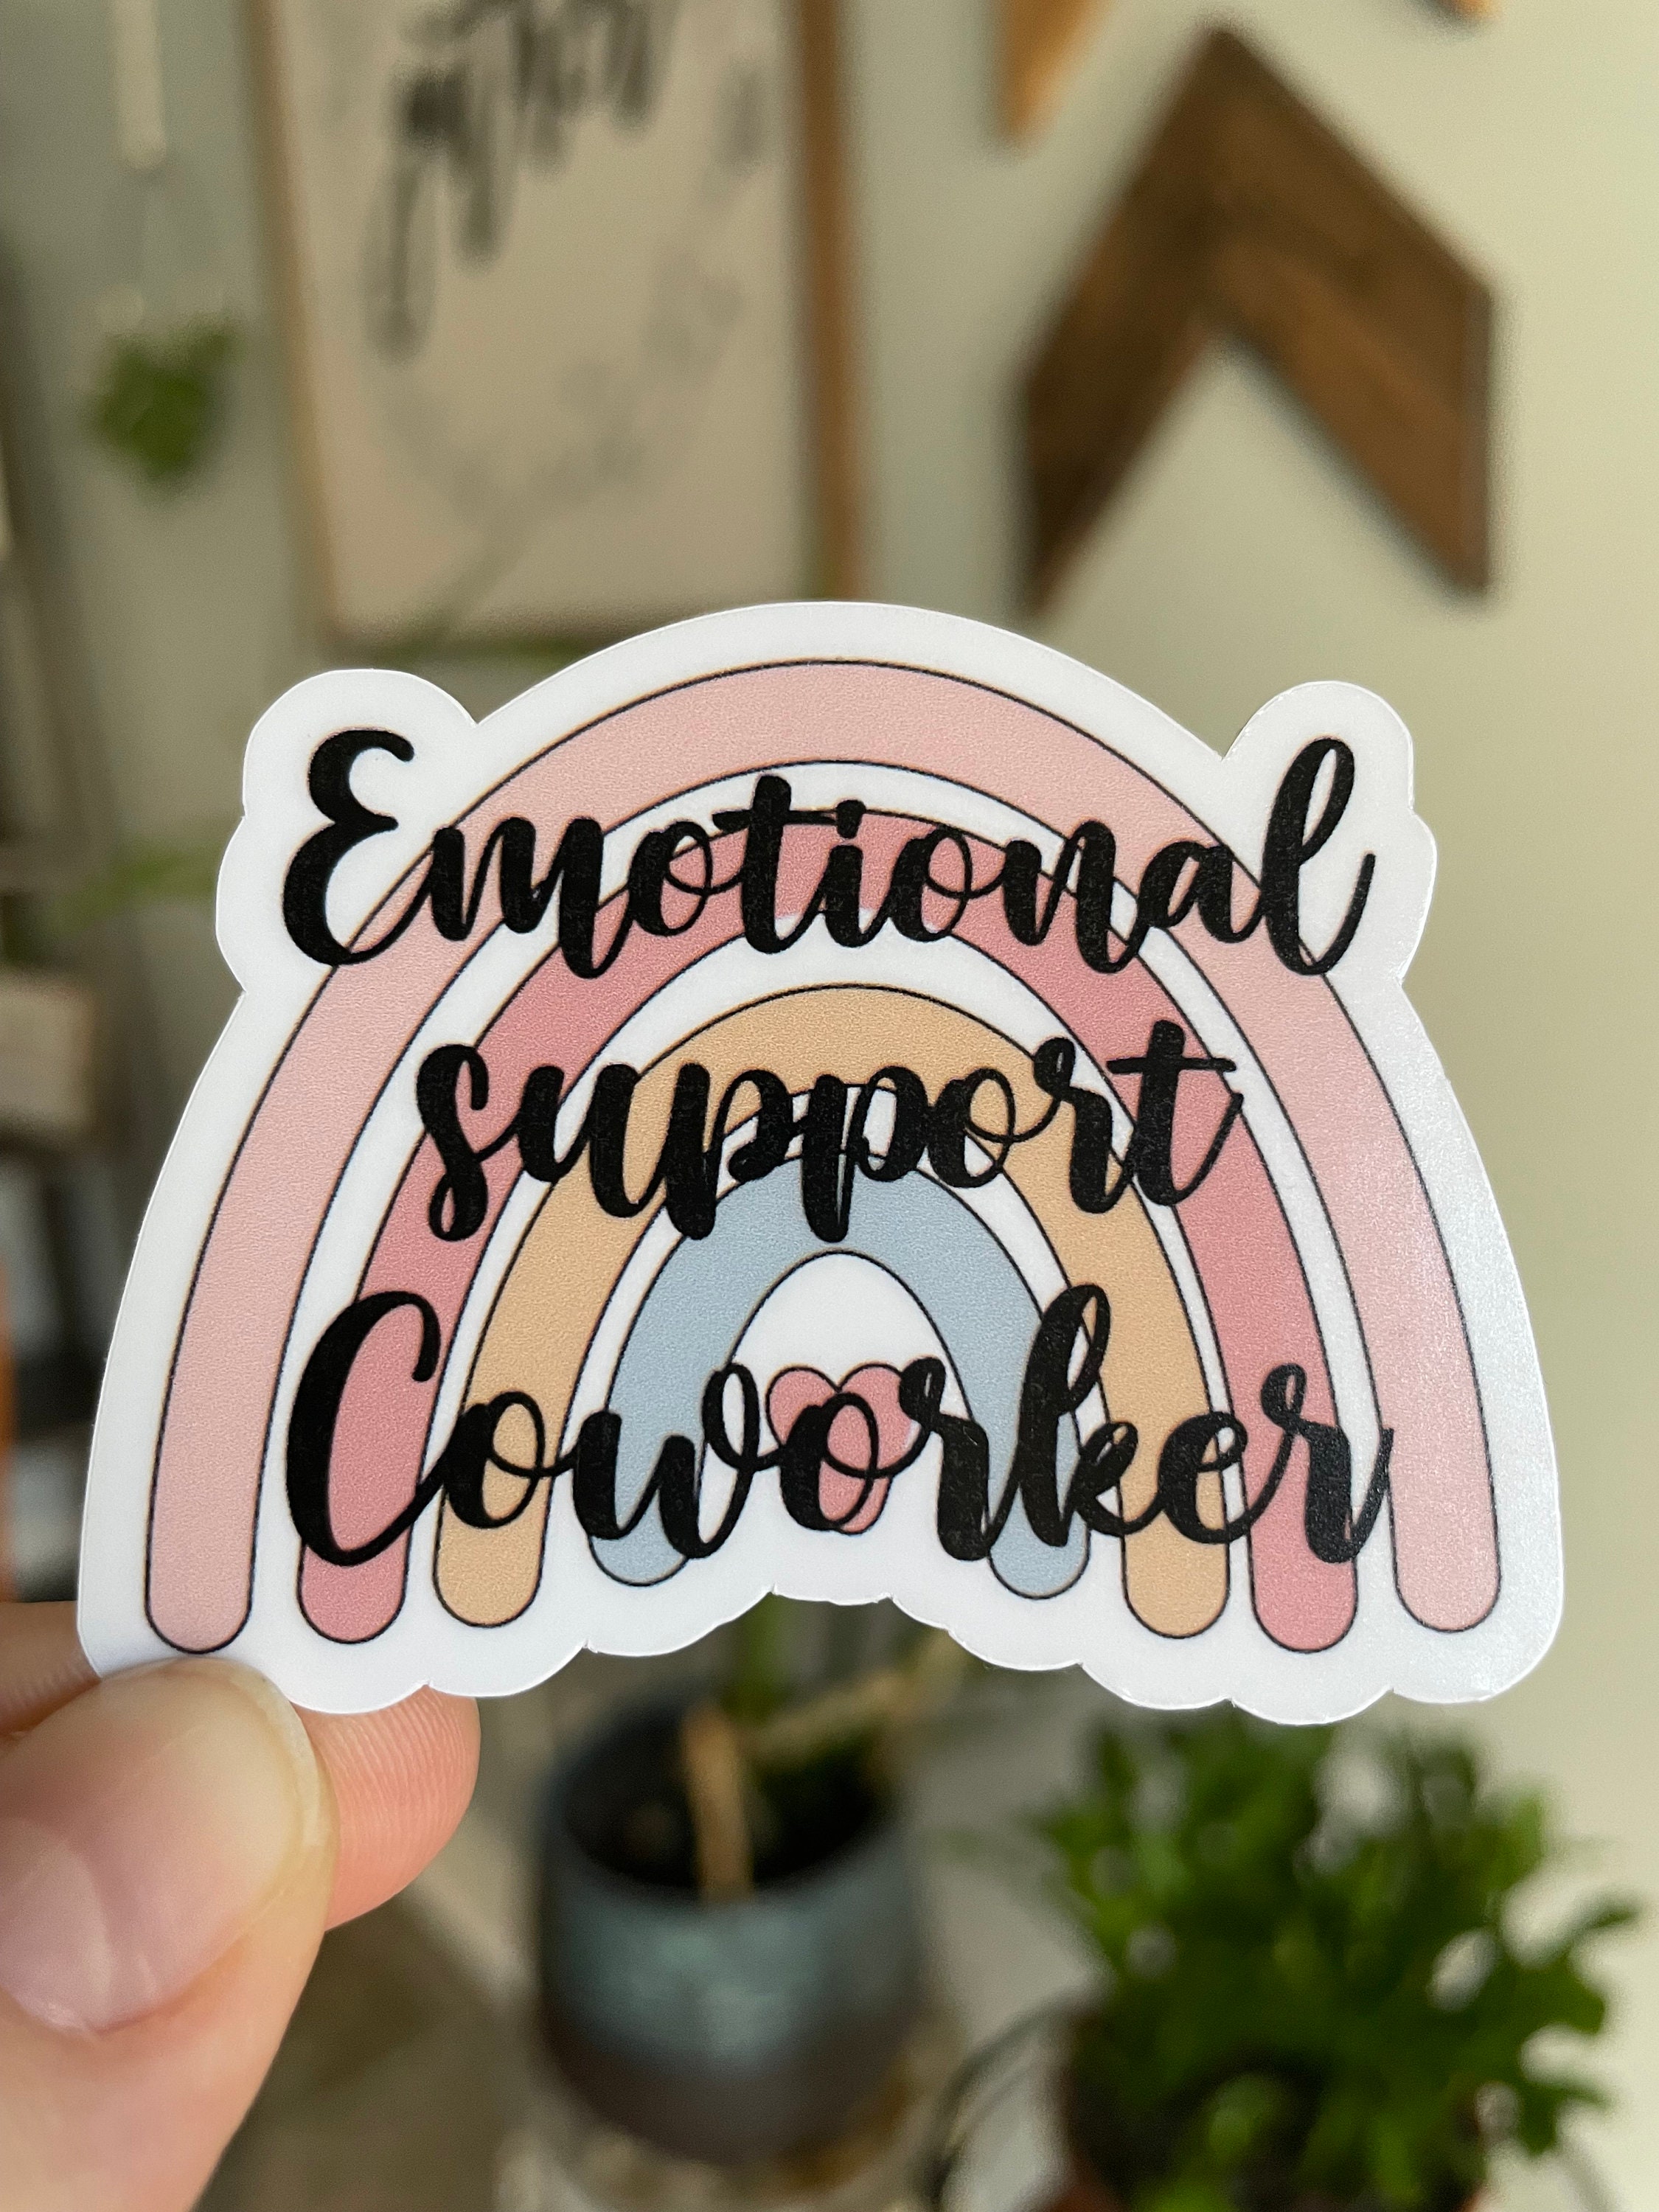 Emotional Support Fries Sticker Cute Holographic L These Weatherproof  Stickers L Great for Any Hydro Flask, Journals, Planners, and Laptops -   Canada